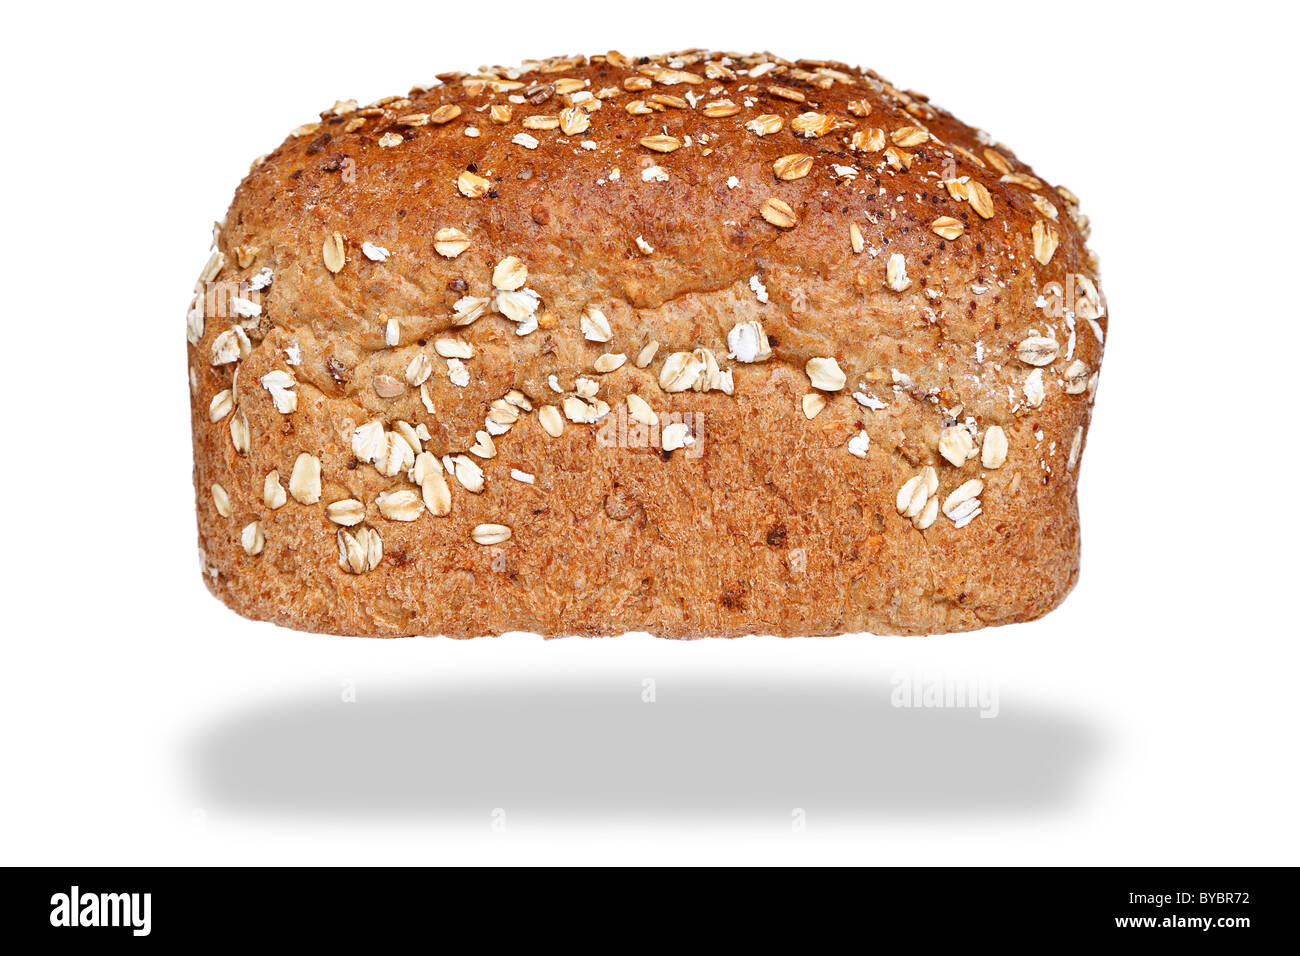 Photo of a loaf of wholemeal bread covered in oats, isolated on a white background with floating shadow. Stock Photo